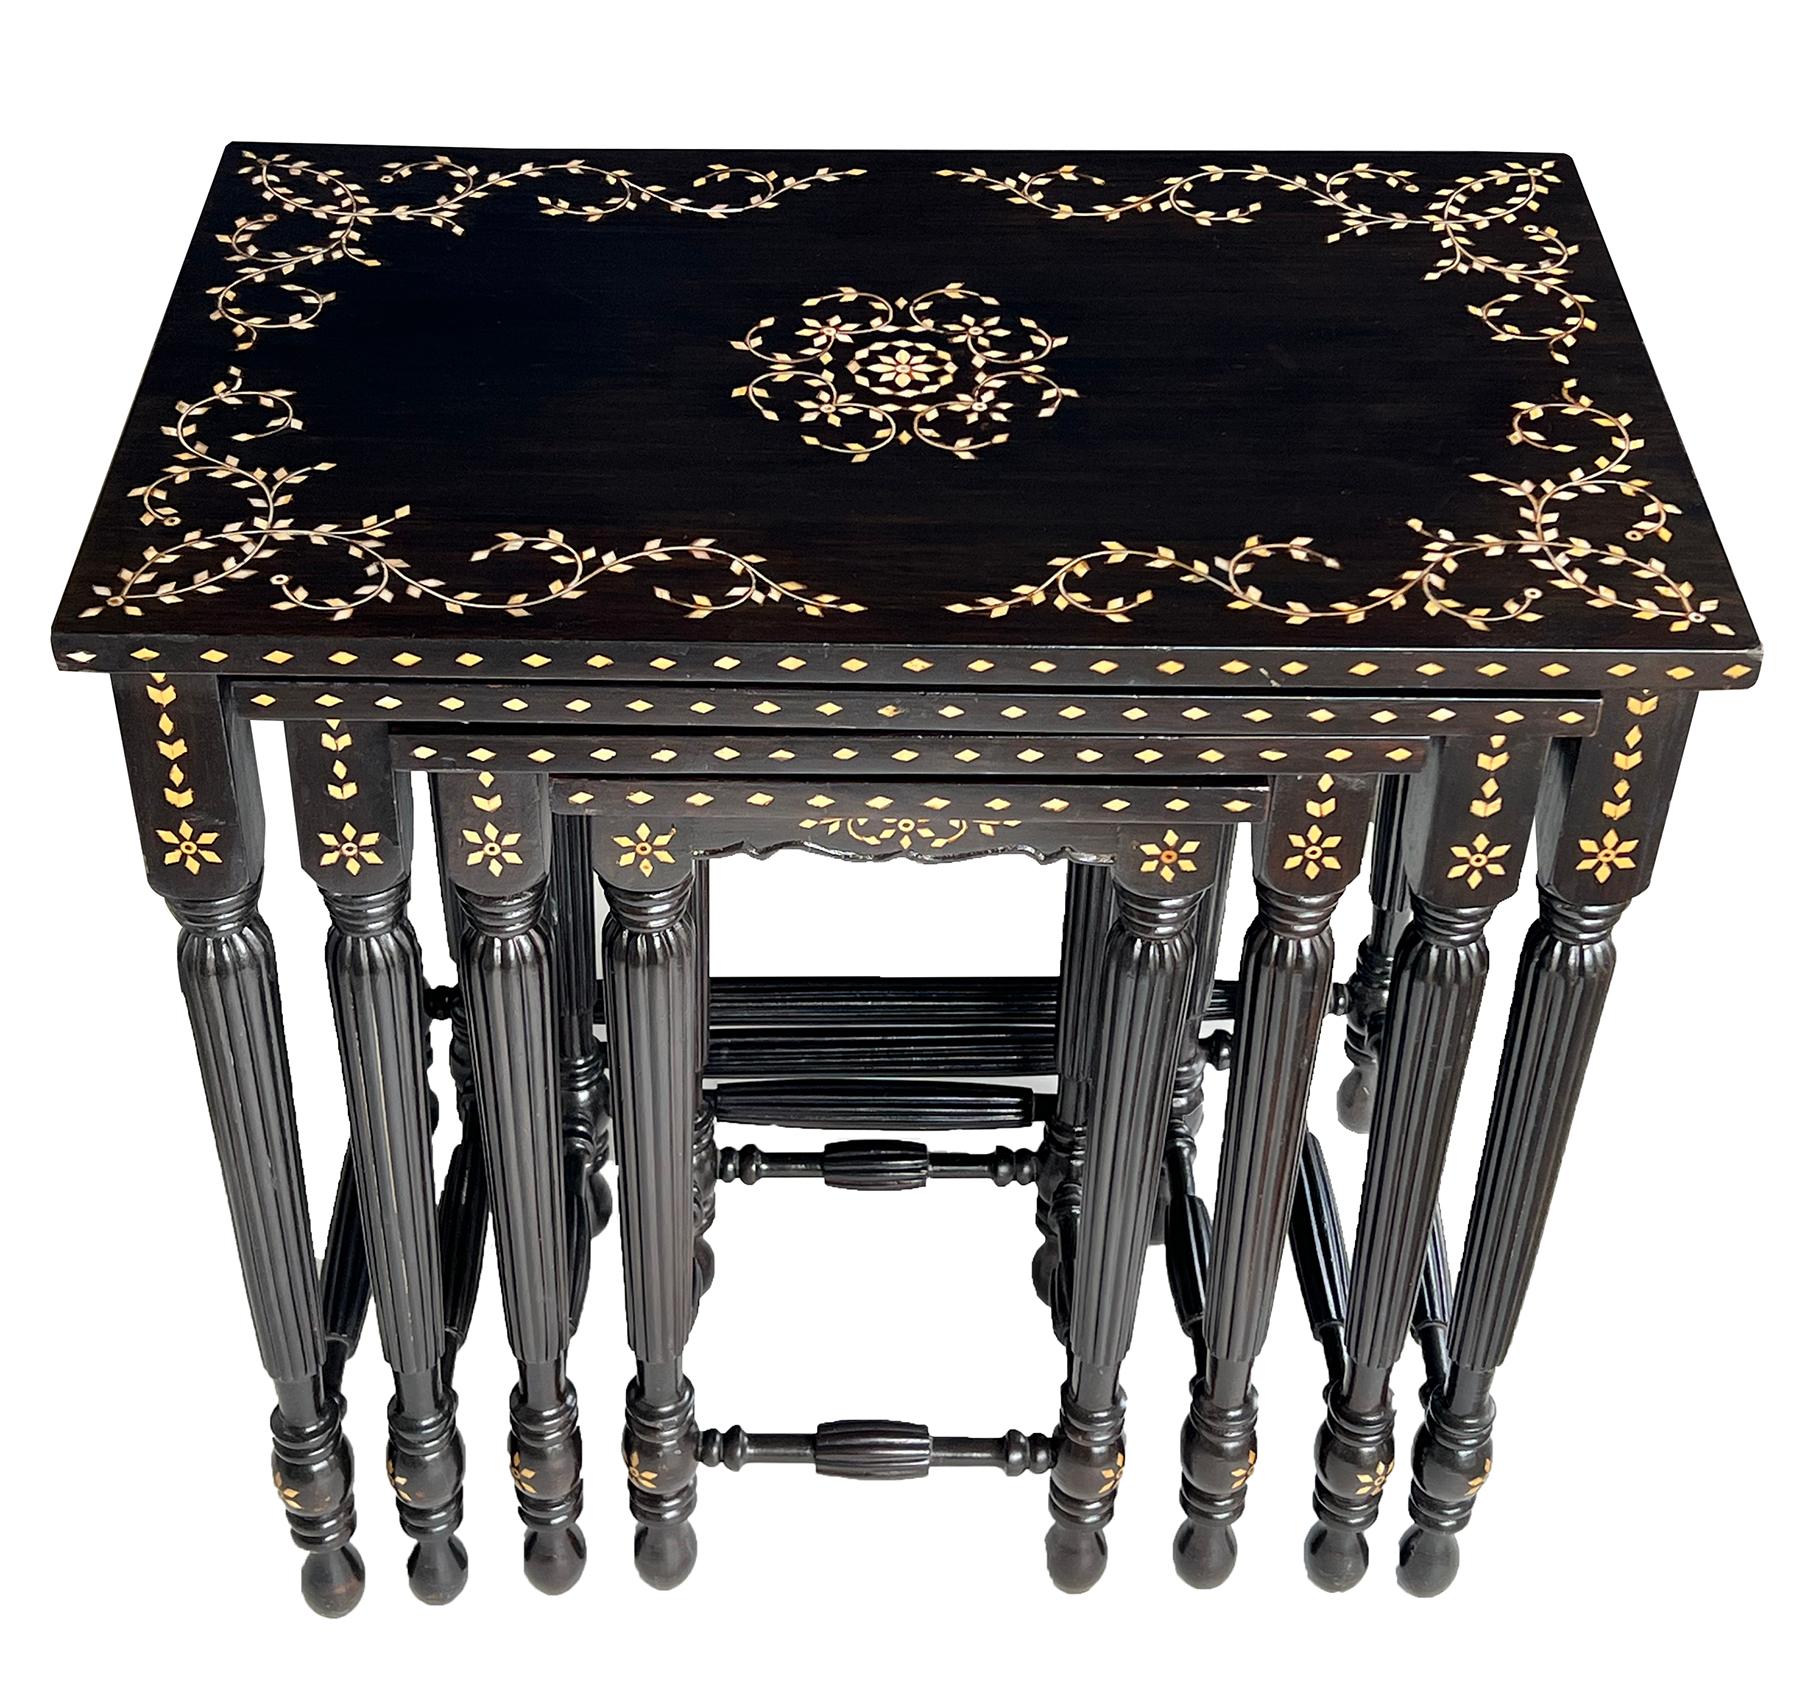 20th Century Rare Set of 4 Anglo Indian Inlaid and Ebonized Wood Nesting Tables